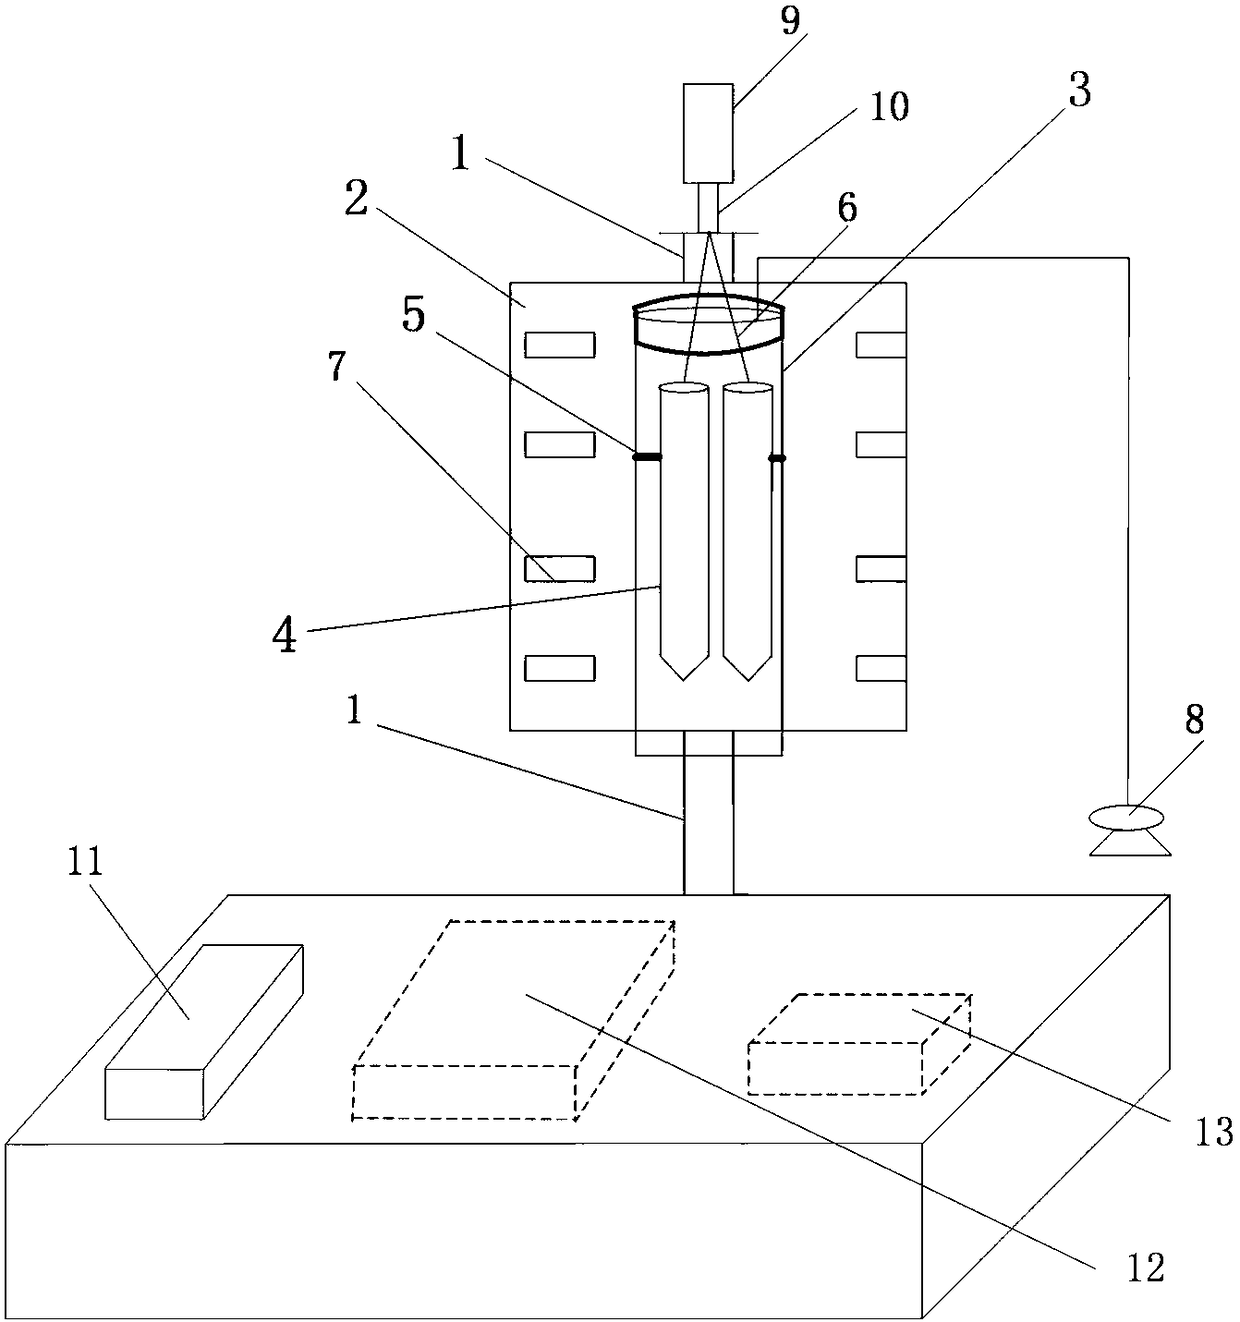 A simple single crystal furnace and its control method